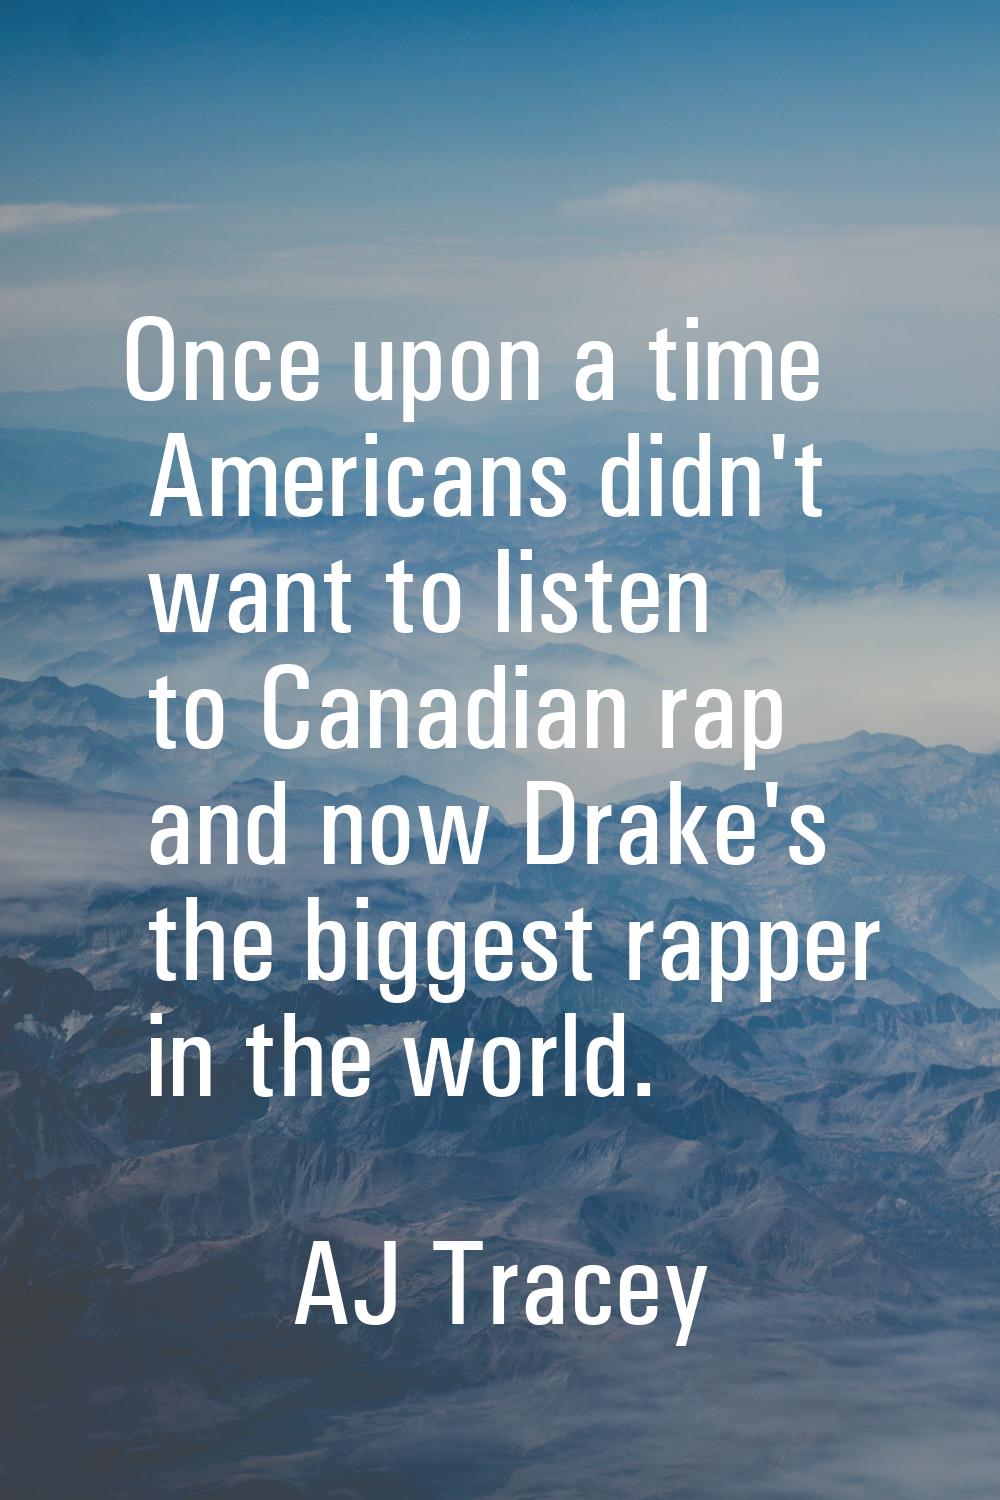 Once upon a time Americans didn't want to listen to Canadian rap and now Drake's the biggest rapper